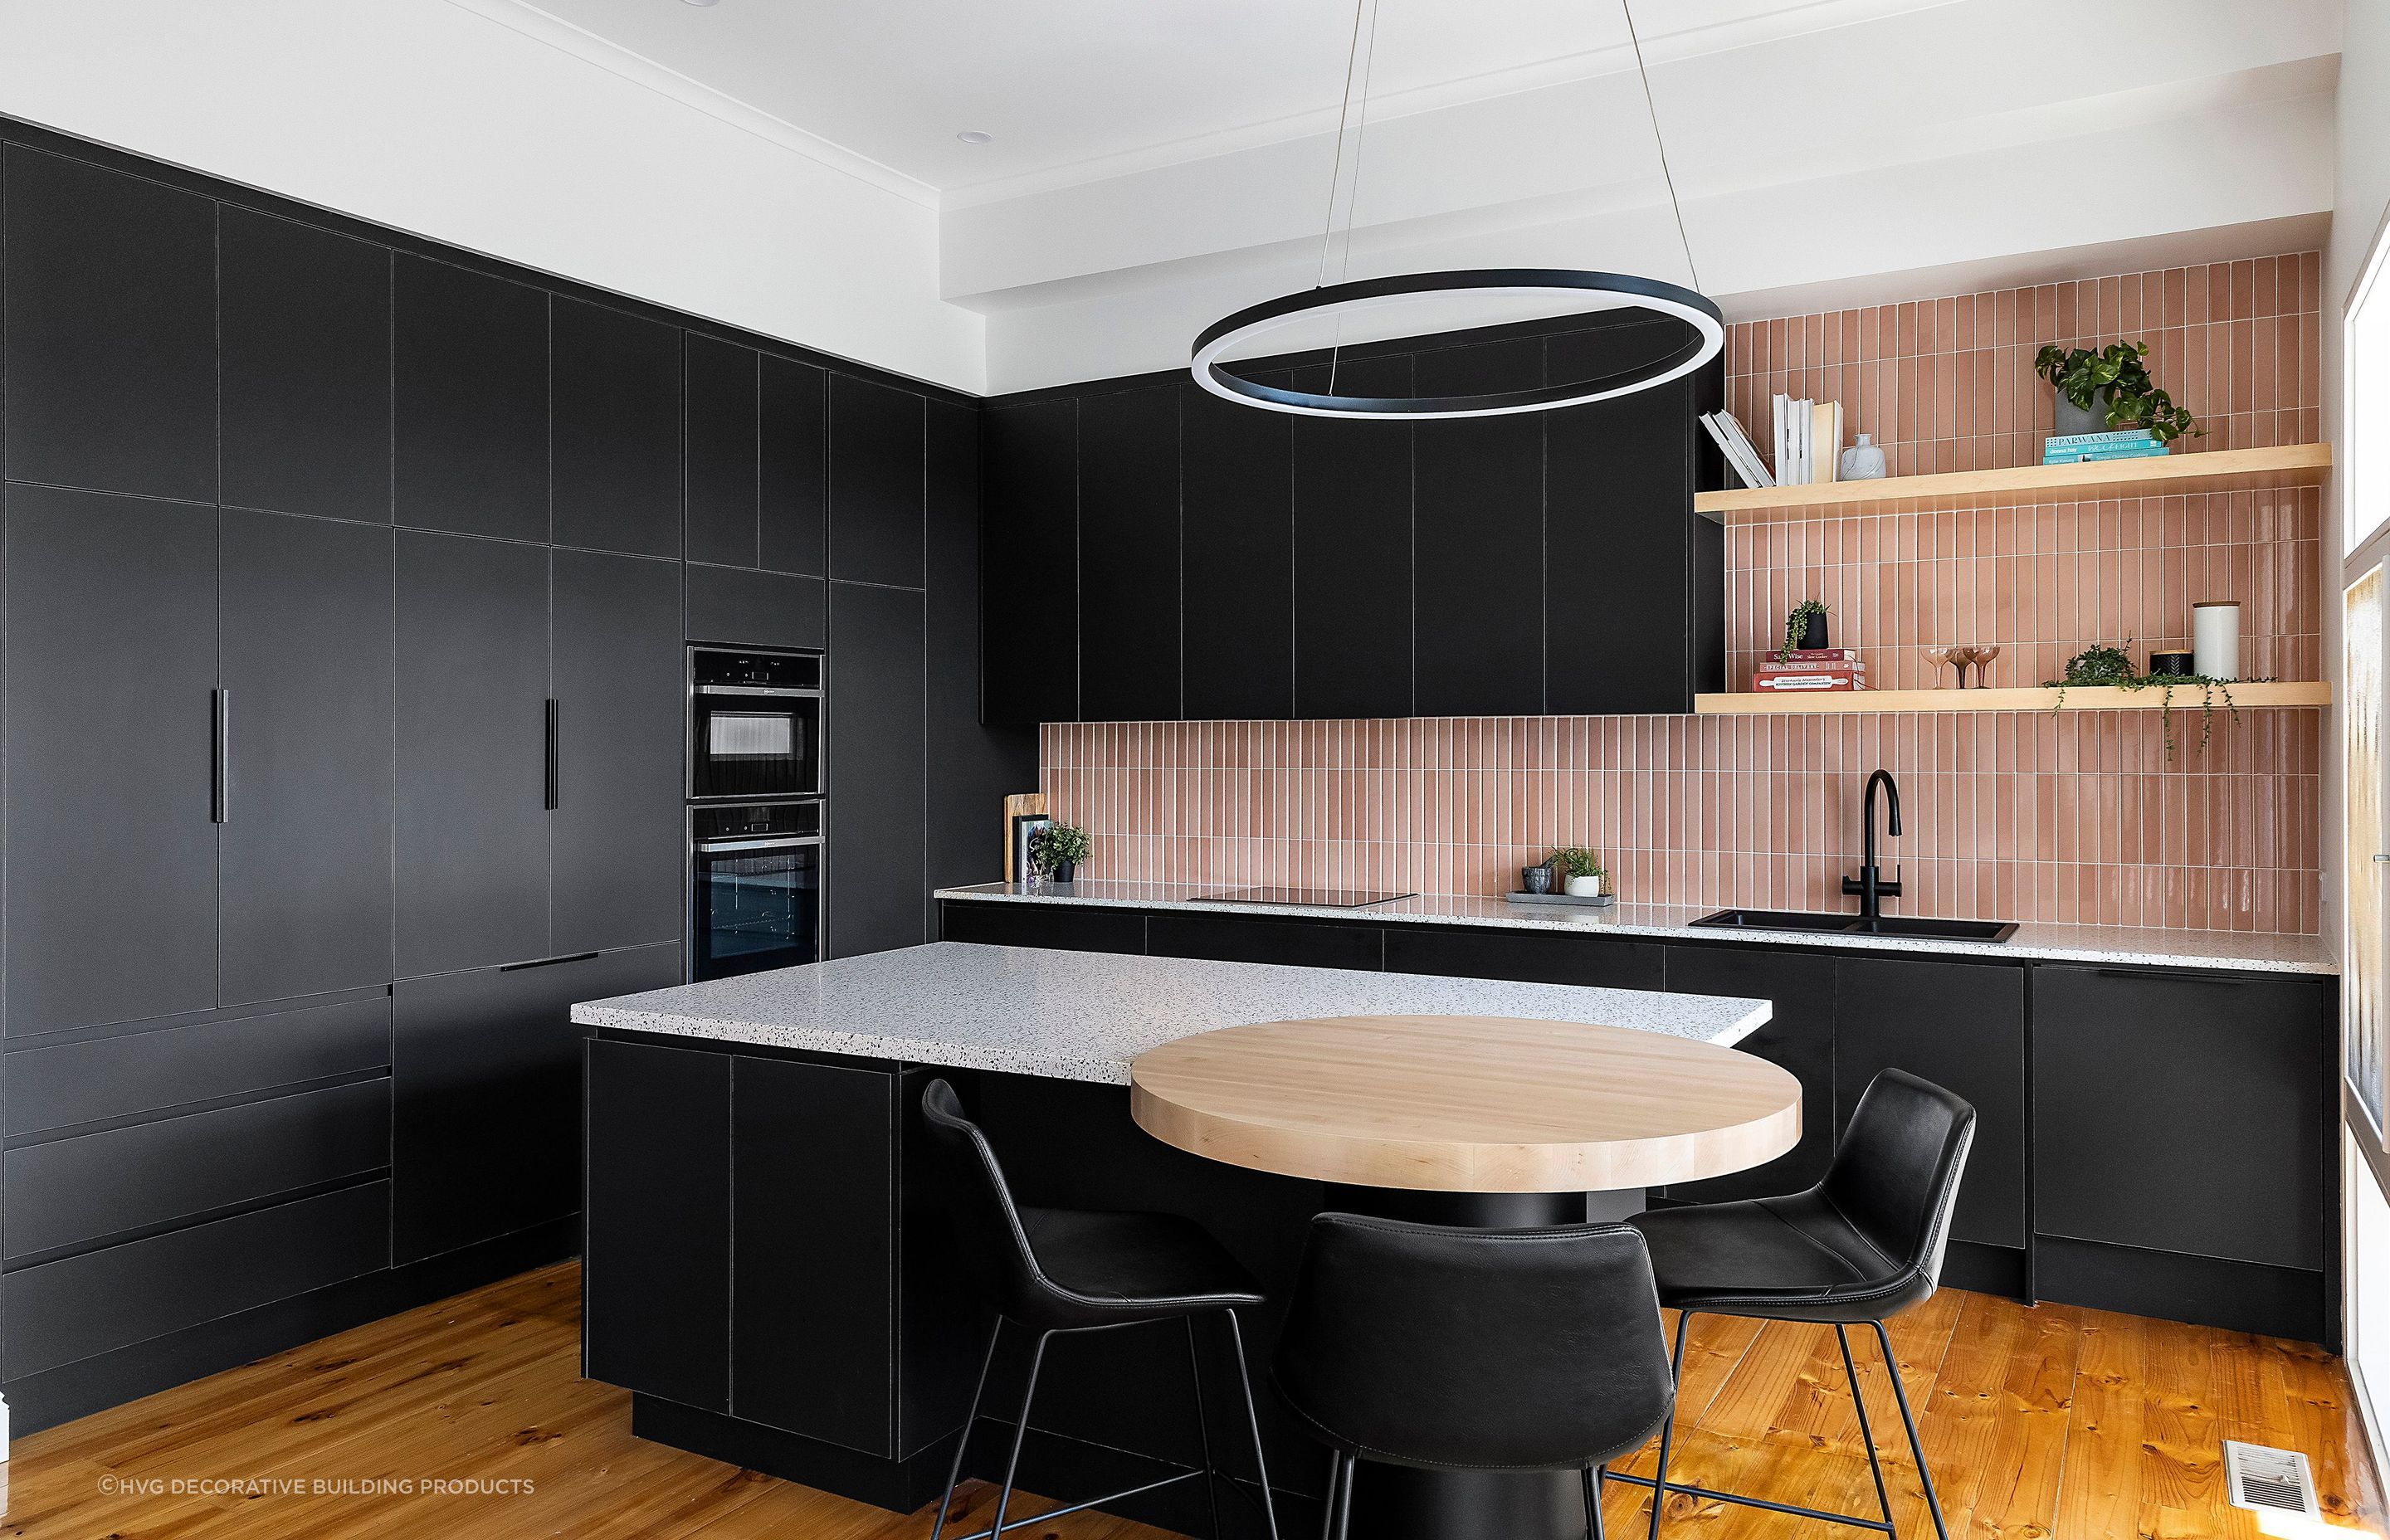 The Rhodes House kitchen in Semaphore, SA shows how shades of black can create a dynamic look with complementary colours and textures